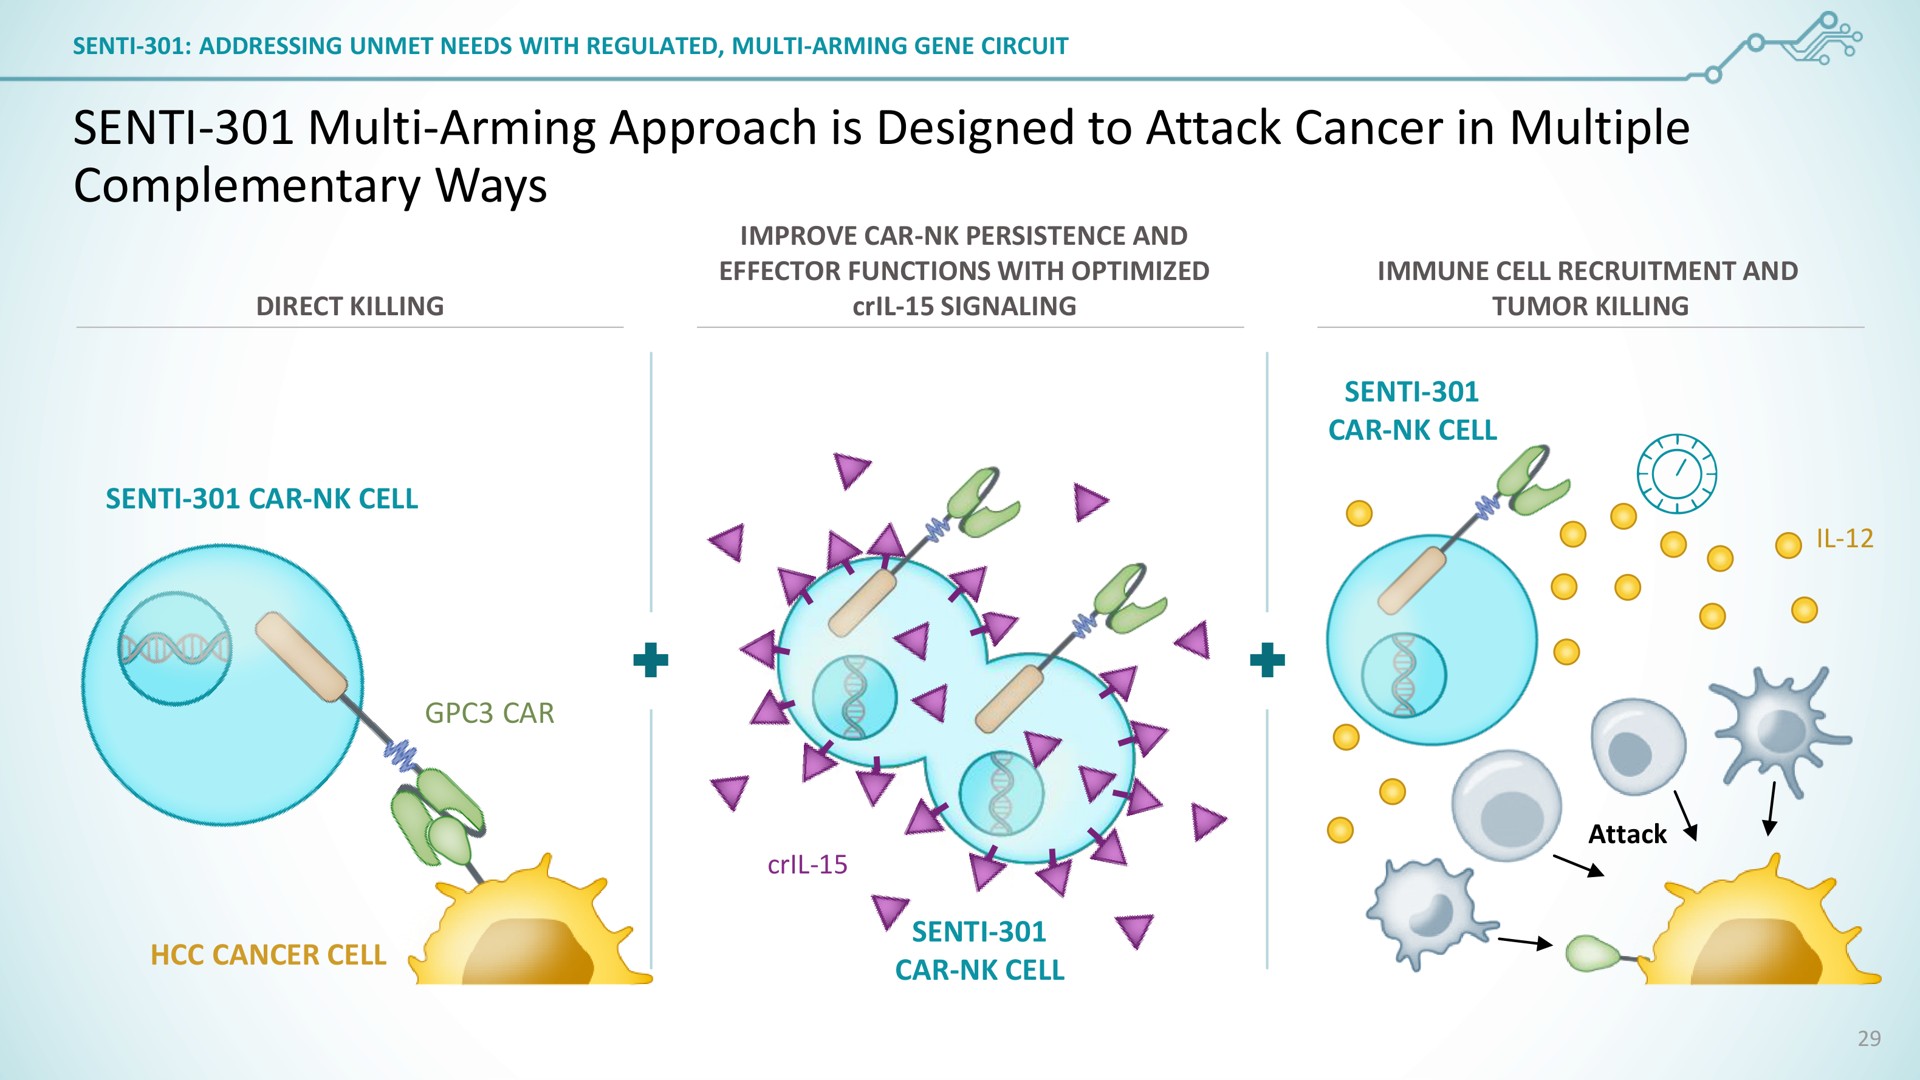 senti arming approach is designed to attack cancer in multiple complementary ways car cell cell of | SentiBio